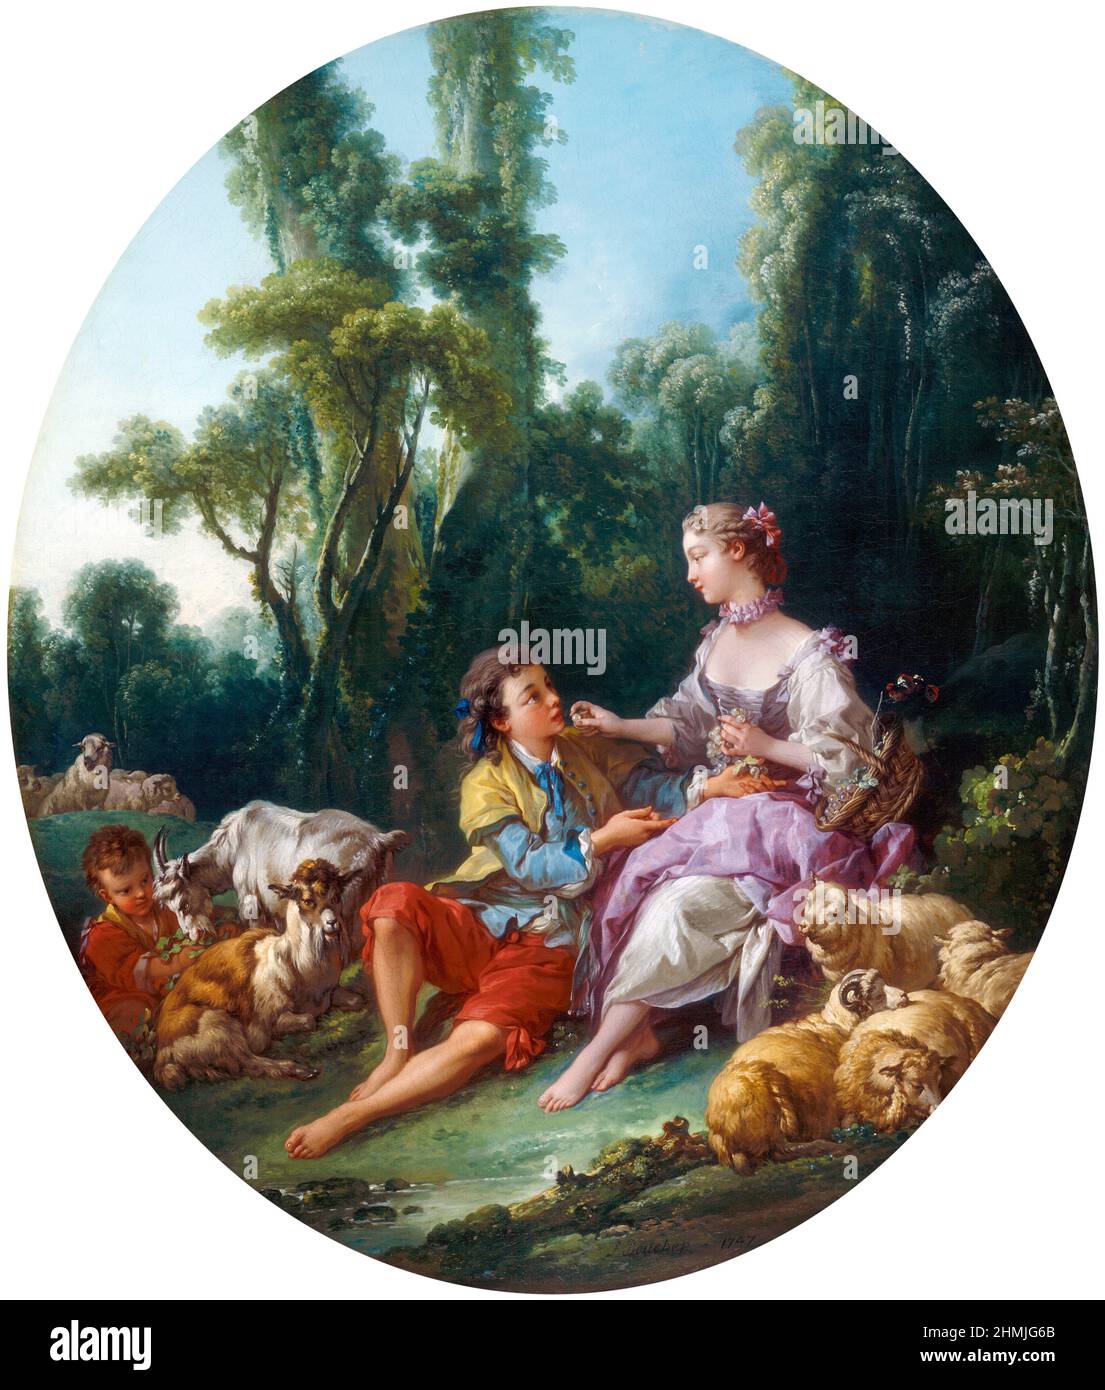 Are They Thinking about the Grape? (Pensent-ils au raisin?) by Francois Boucher (1703-1770), oil on canvas, 1747 Stock Photo